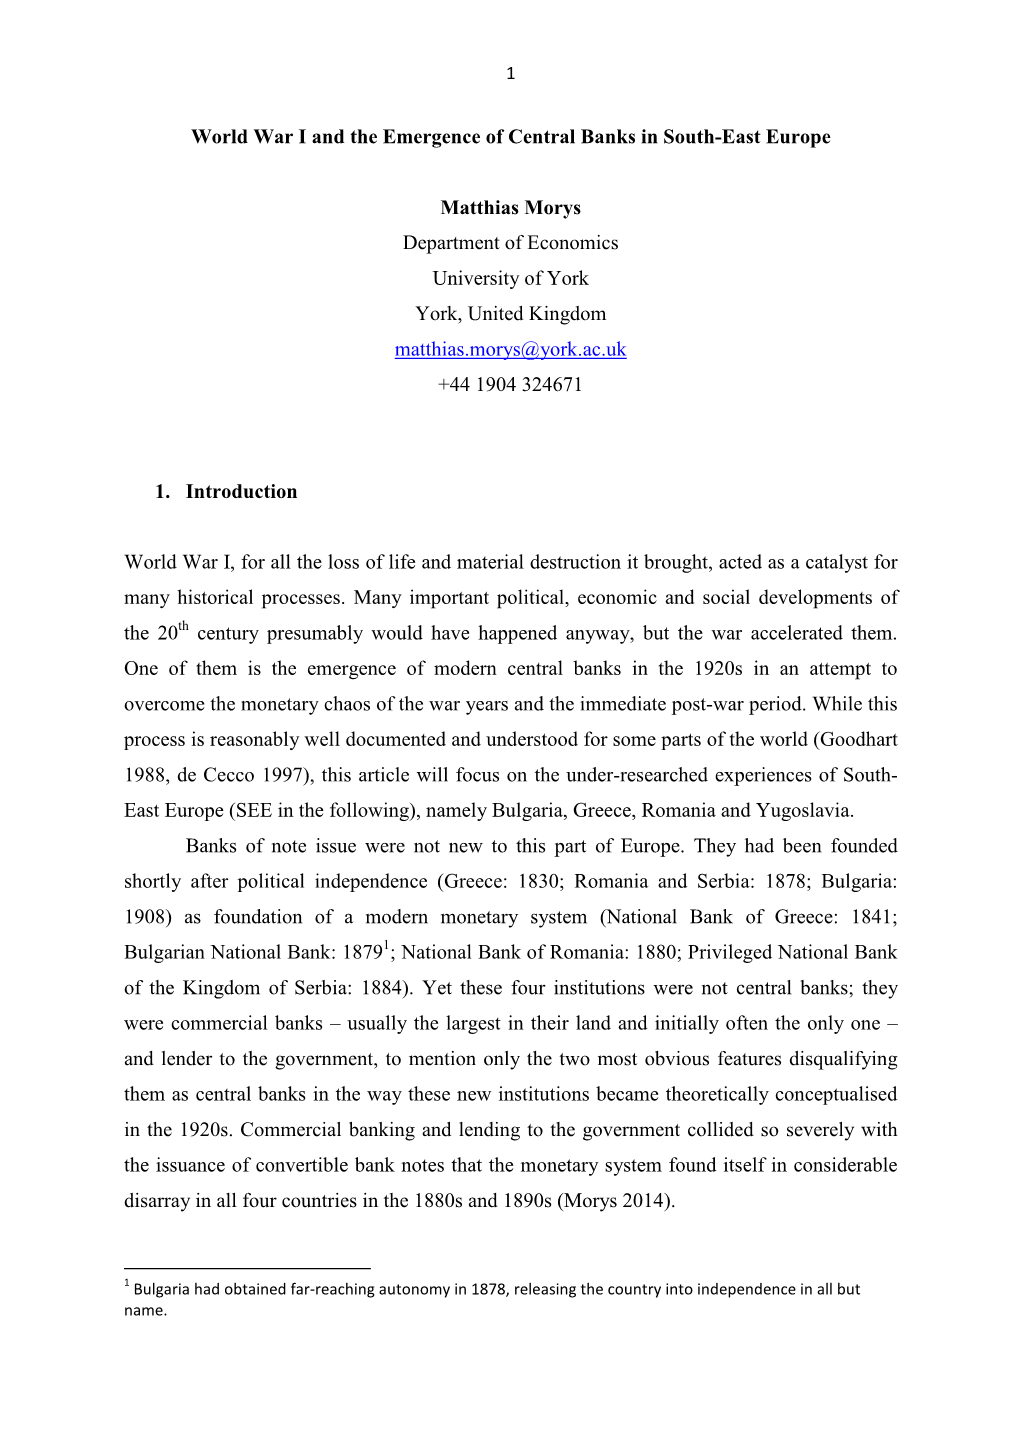 World War I and the Emergence of Central Banks in South-East Europe